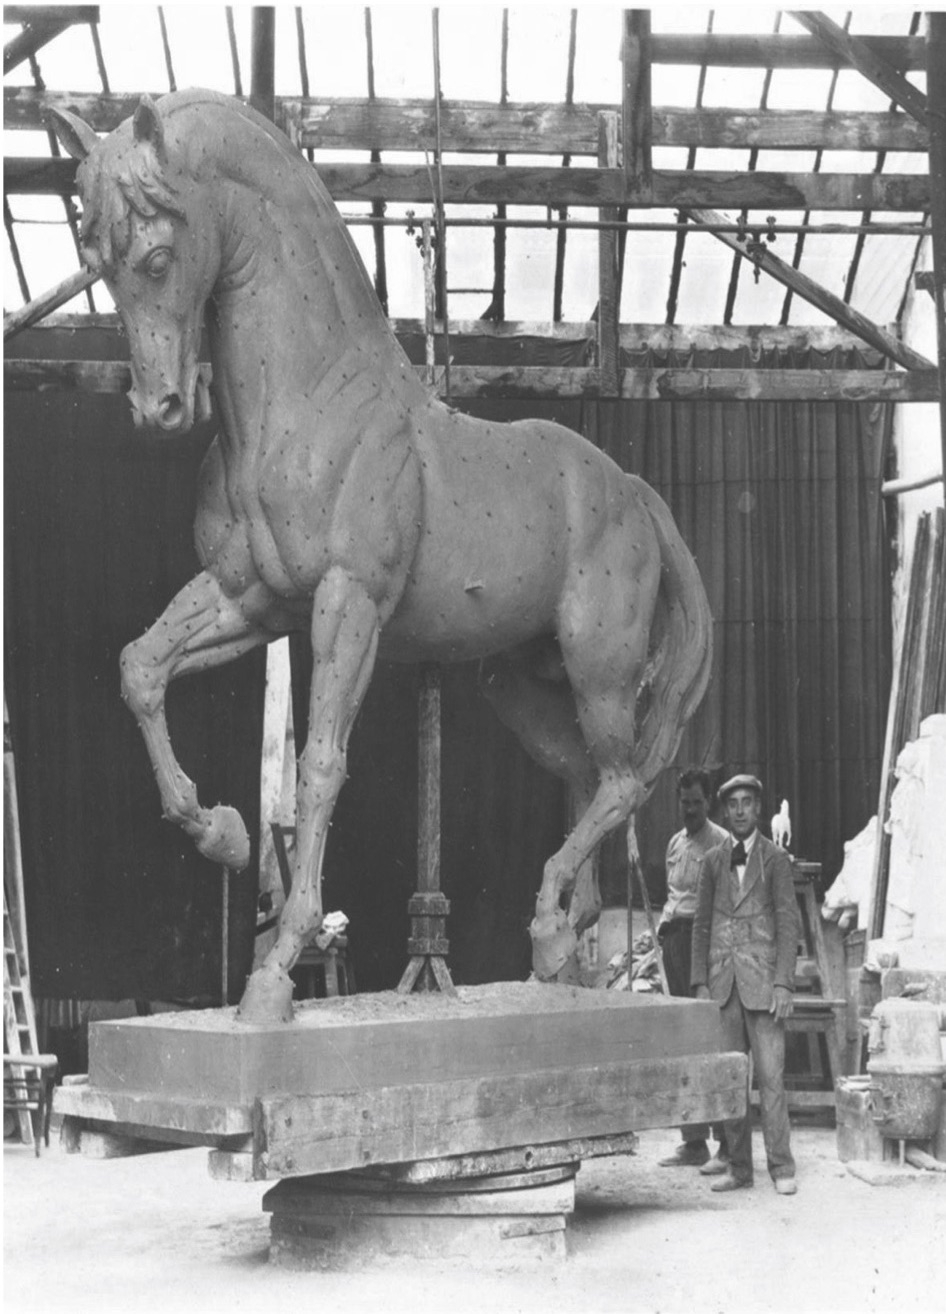 The horse of the Mohammed Ali’s statue in the studio of the sculptor Konstantinos Dimitriadis. Paris, c. 1932.